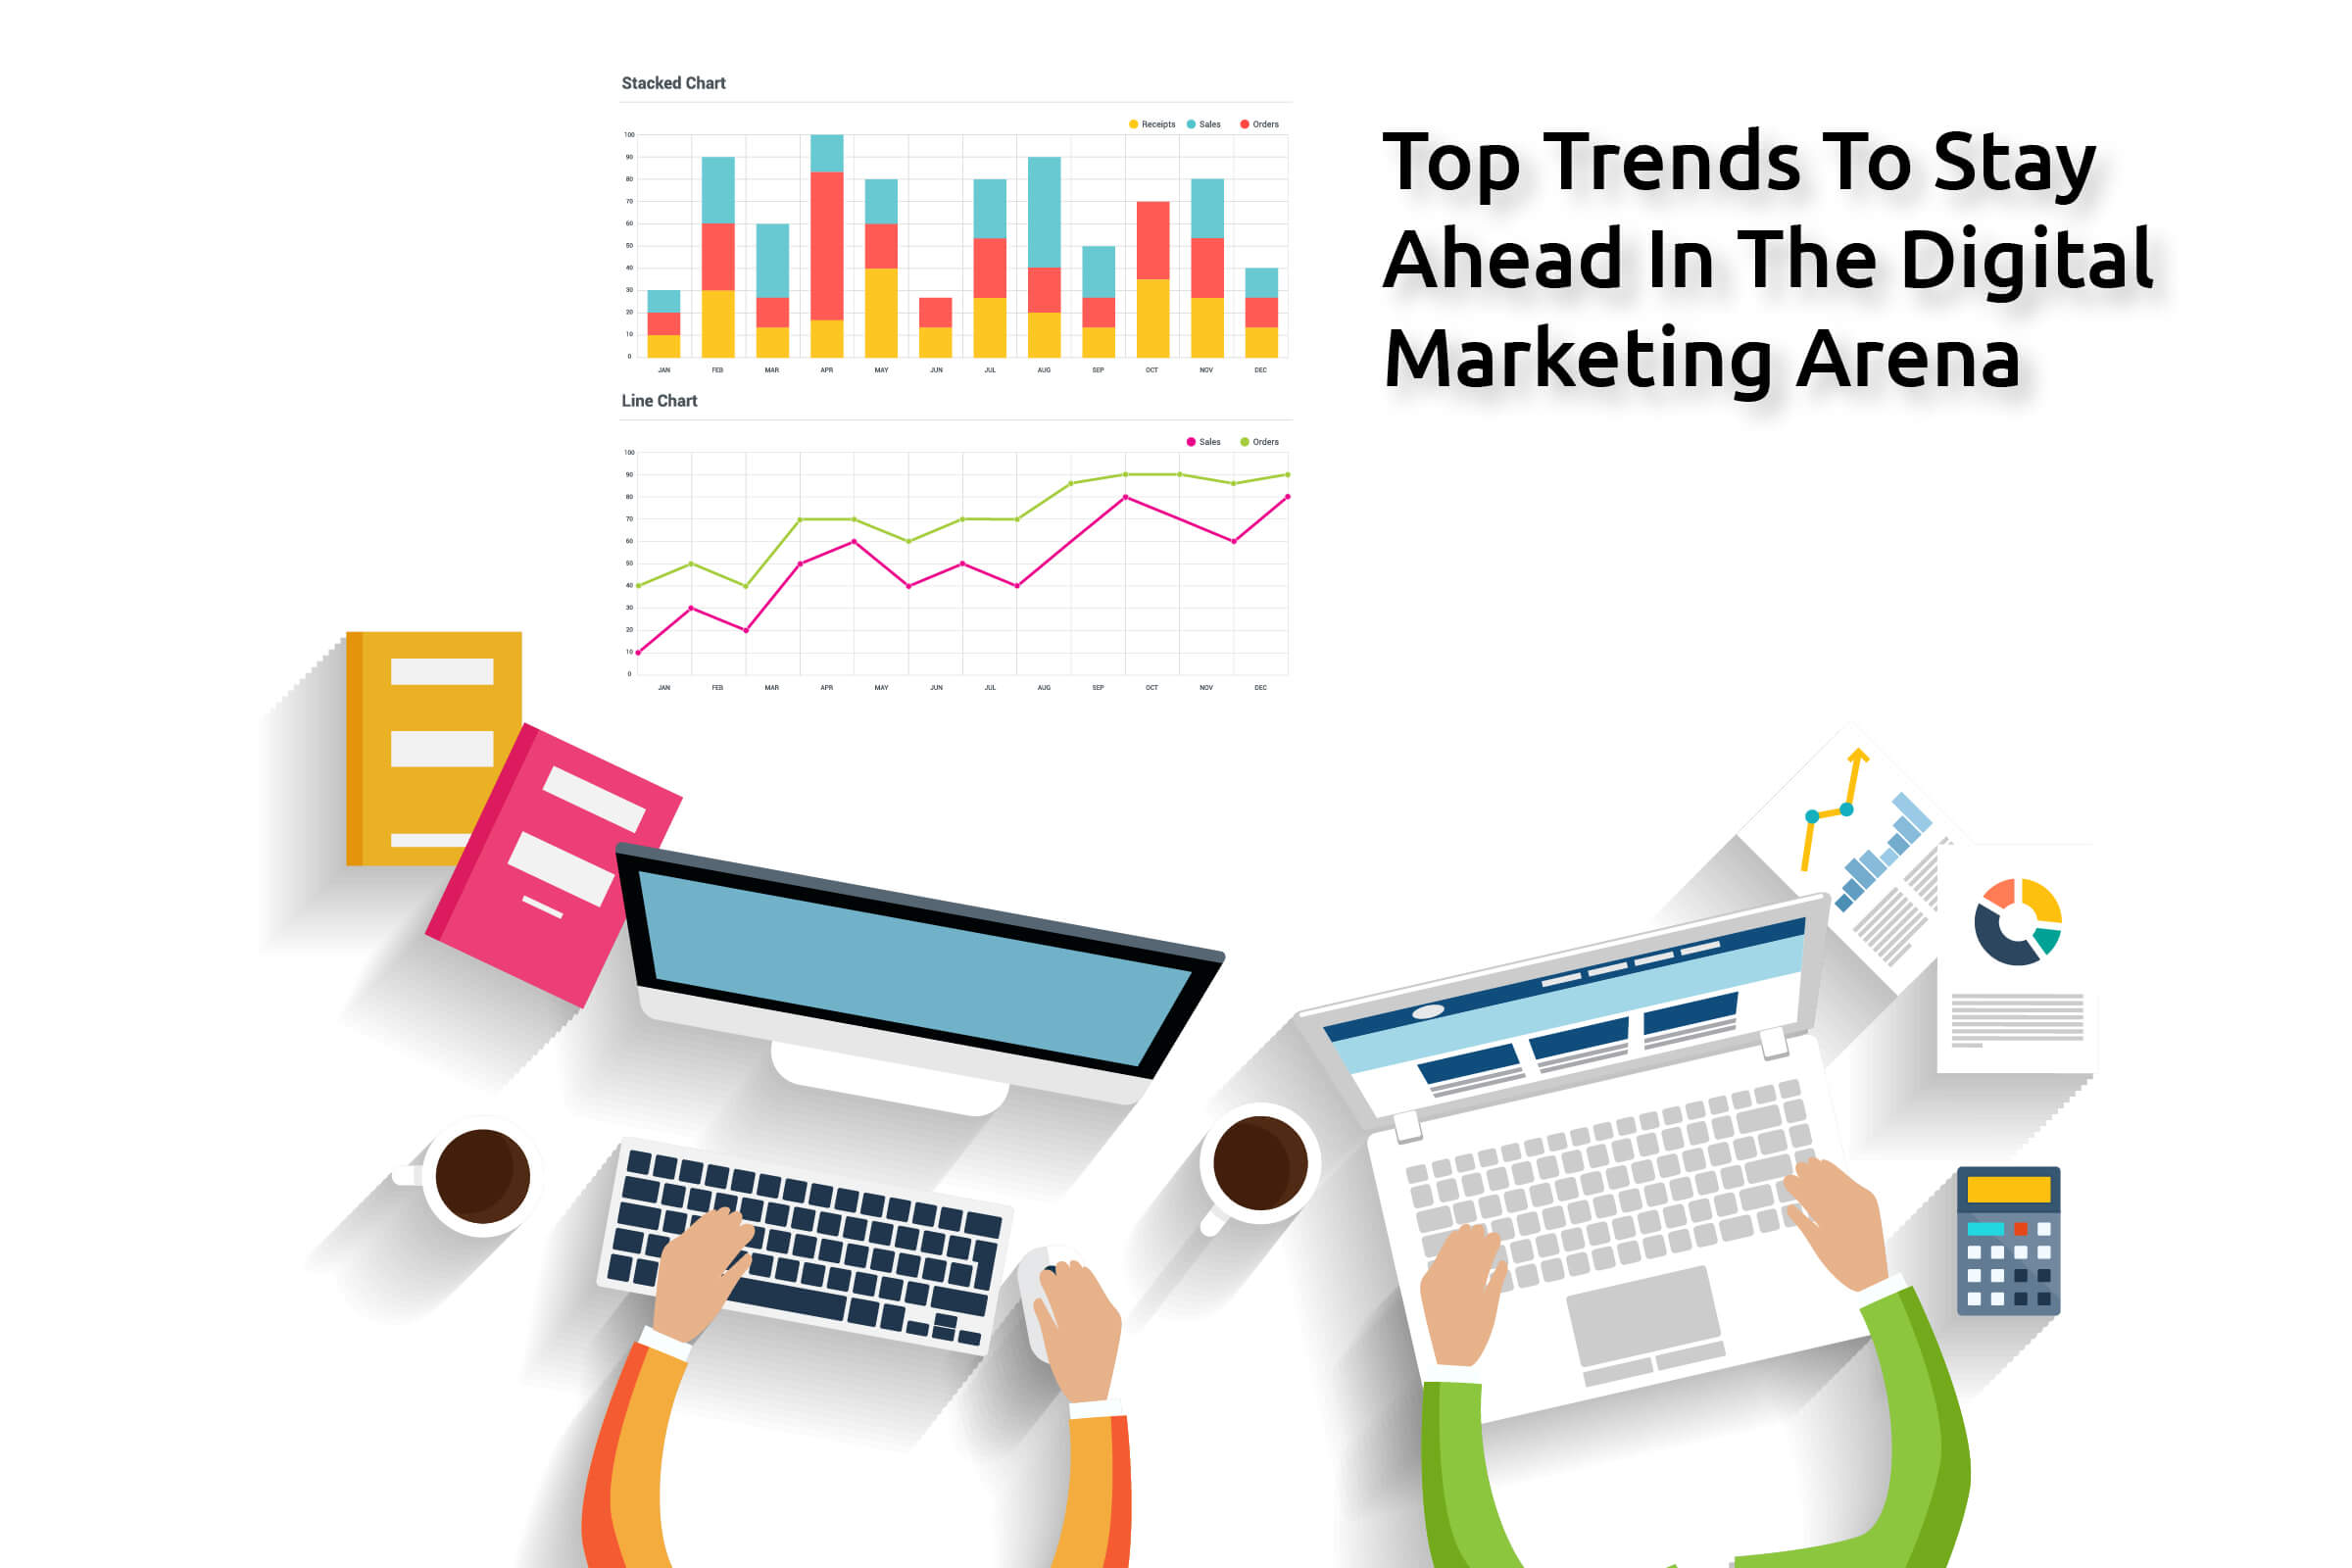 Top trends to stay ahead in the Digital Marketing Arena